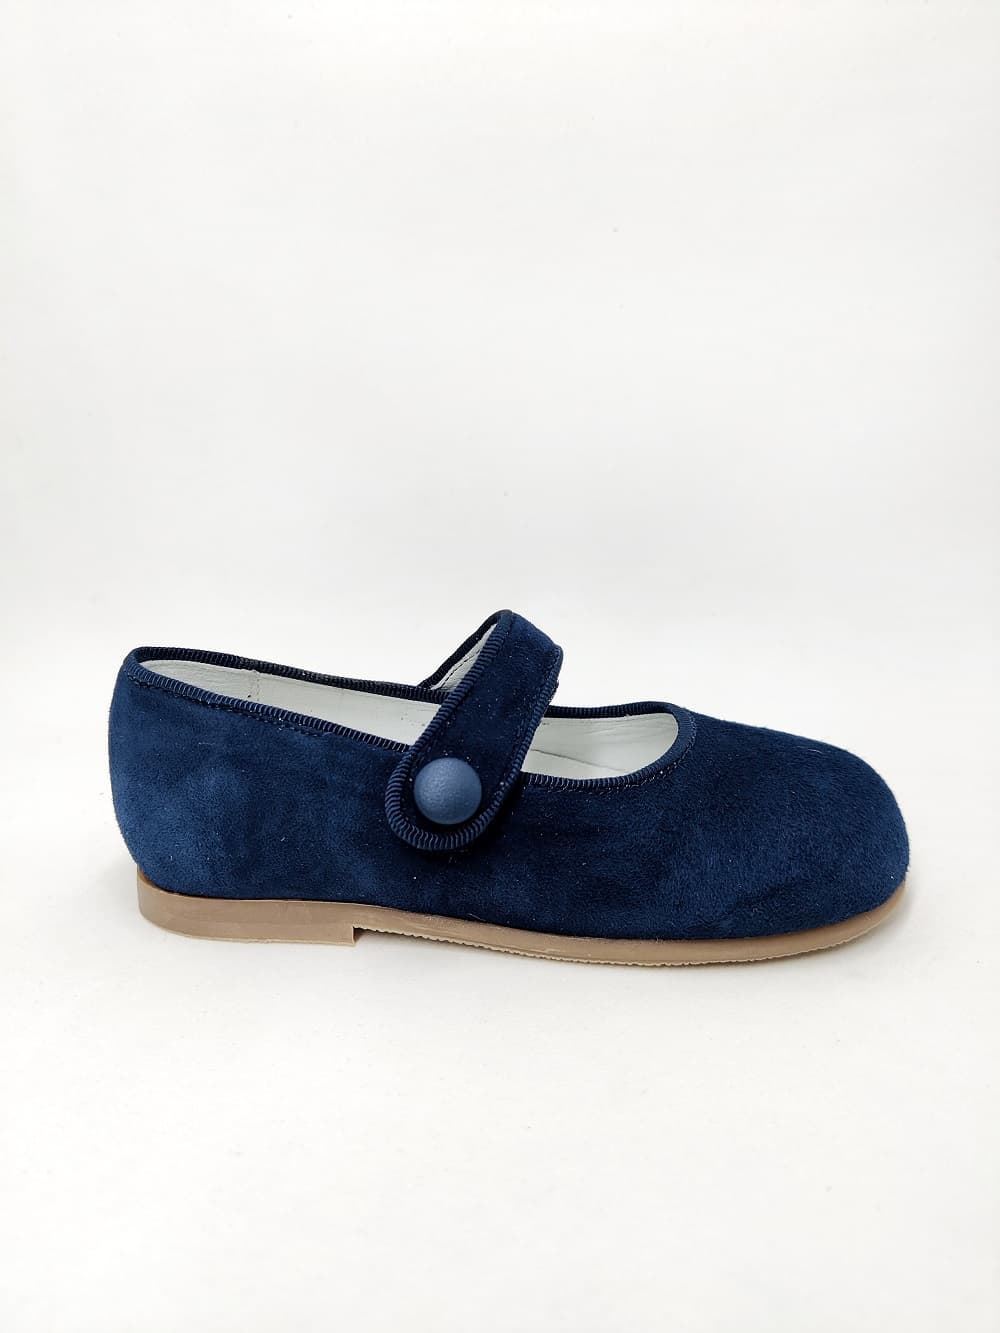 Pirufin Mary Janes for baby girls in Navy Blue suede - Image 2